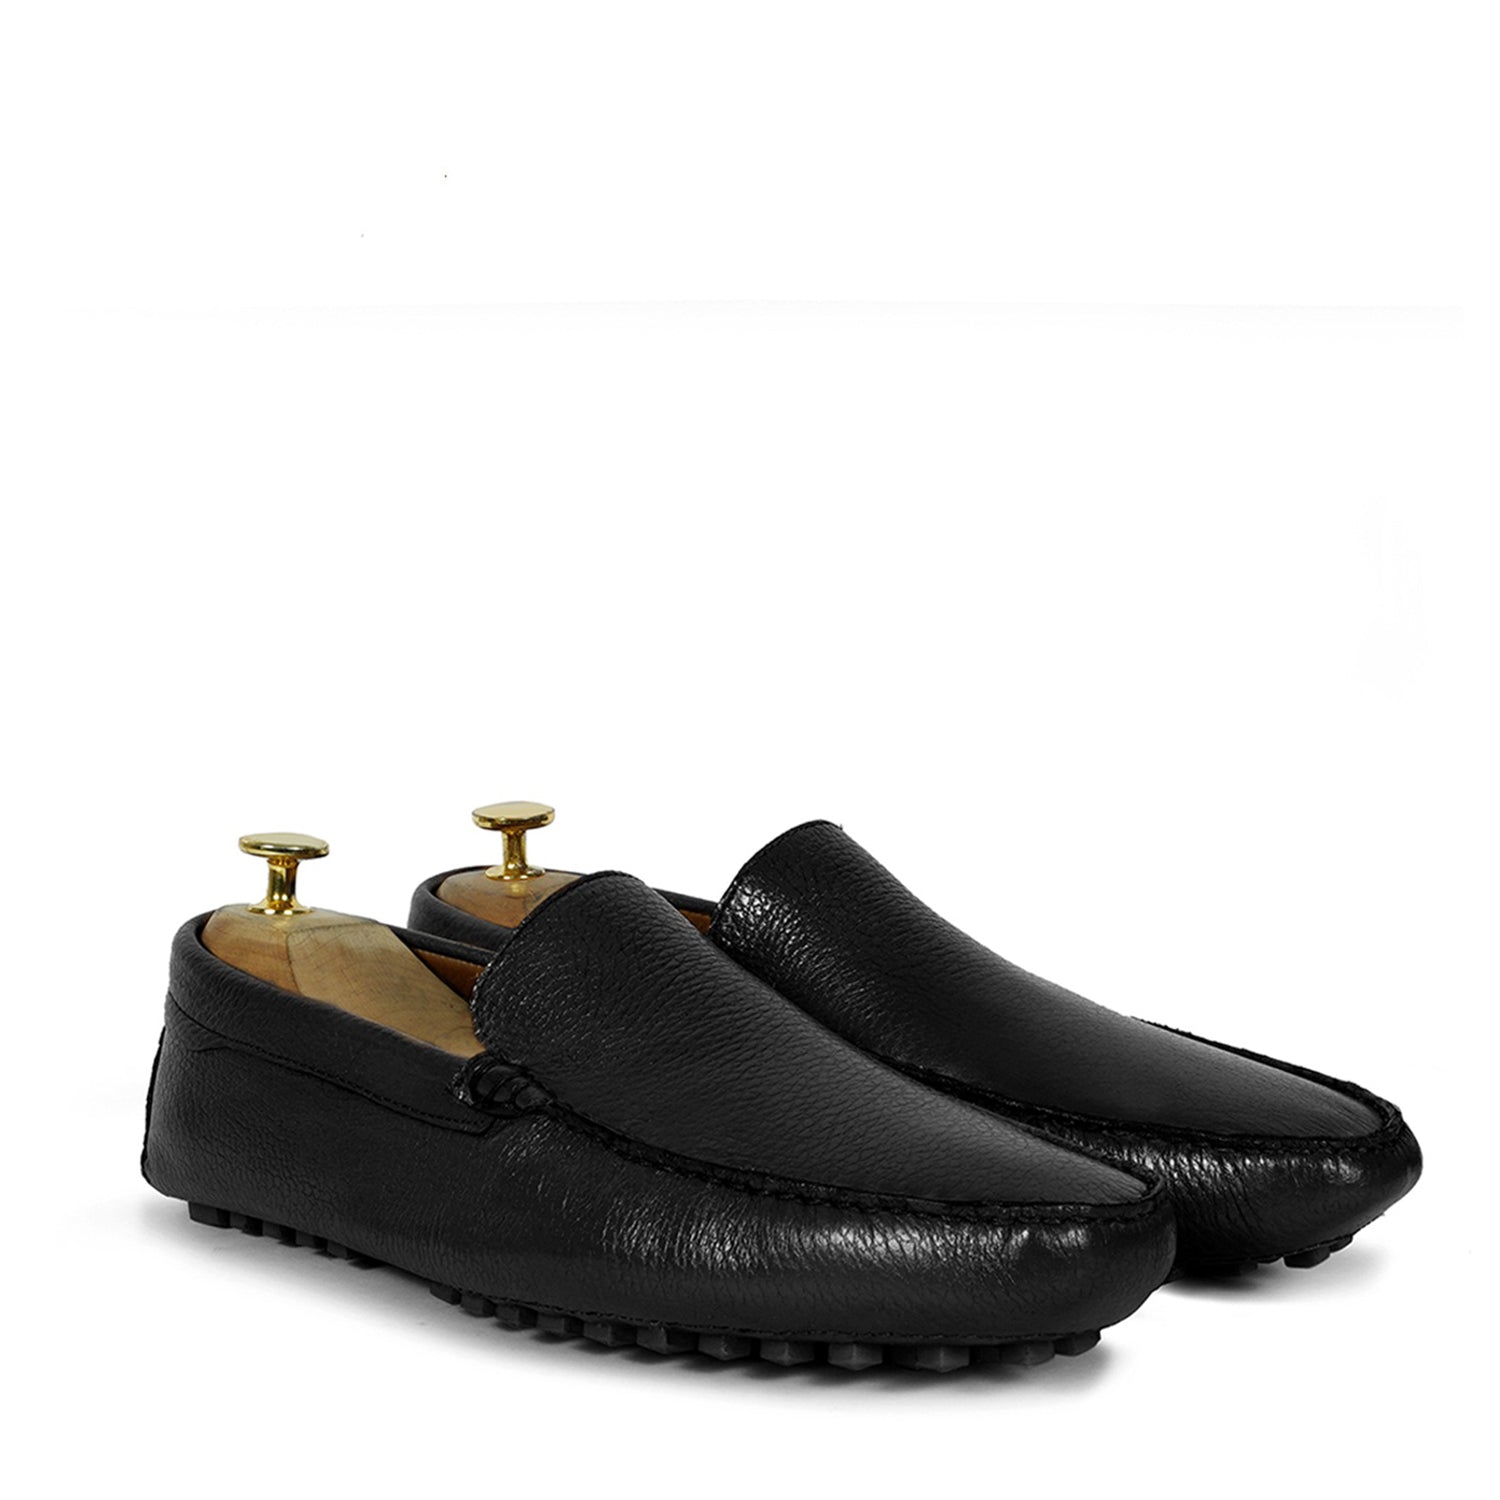 Black Textured Leather Studded Driver Sole Loafers